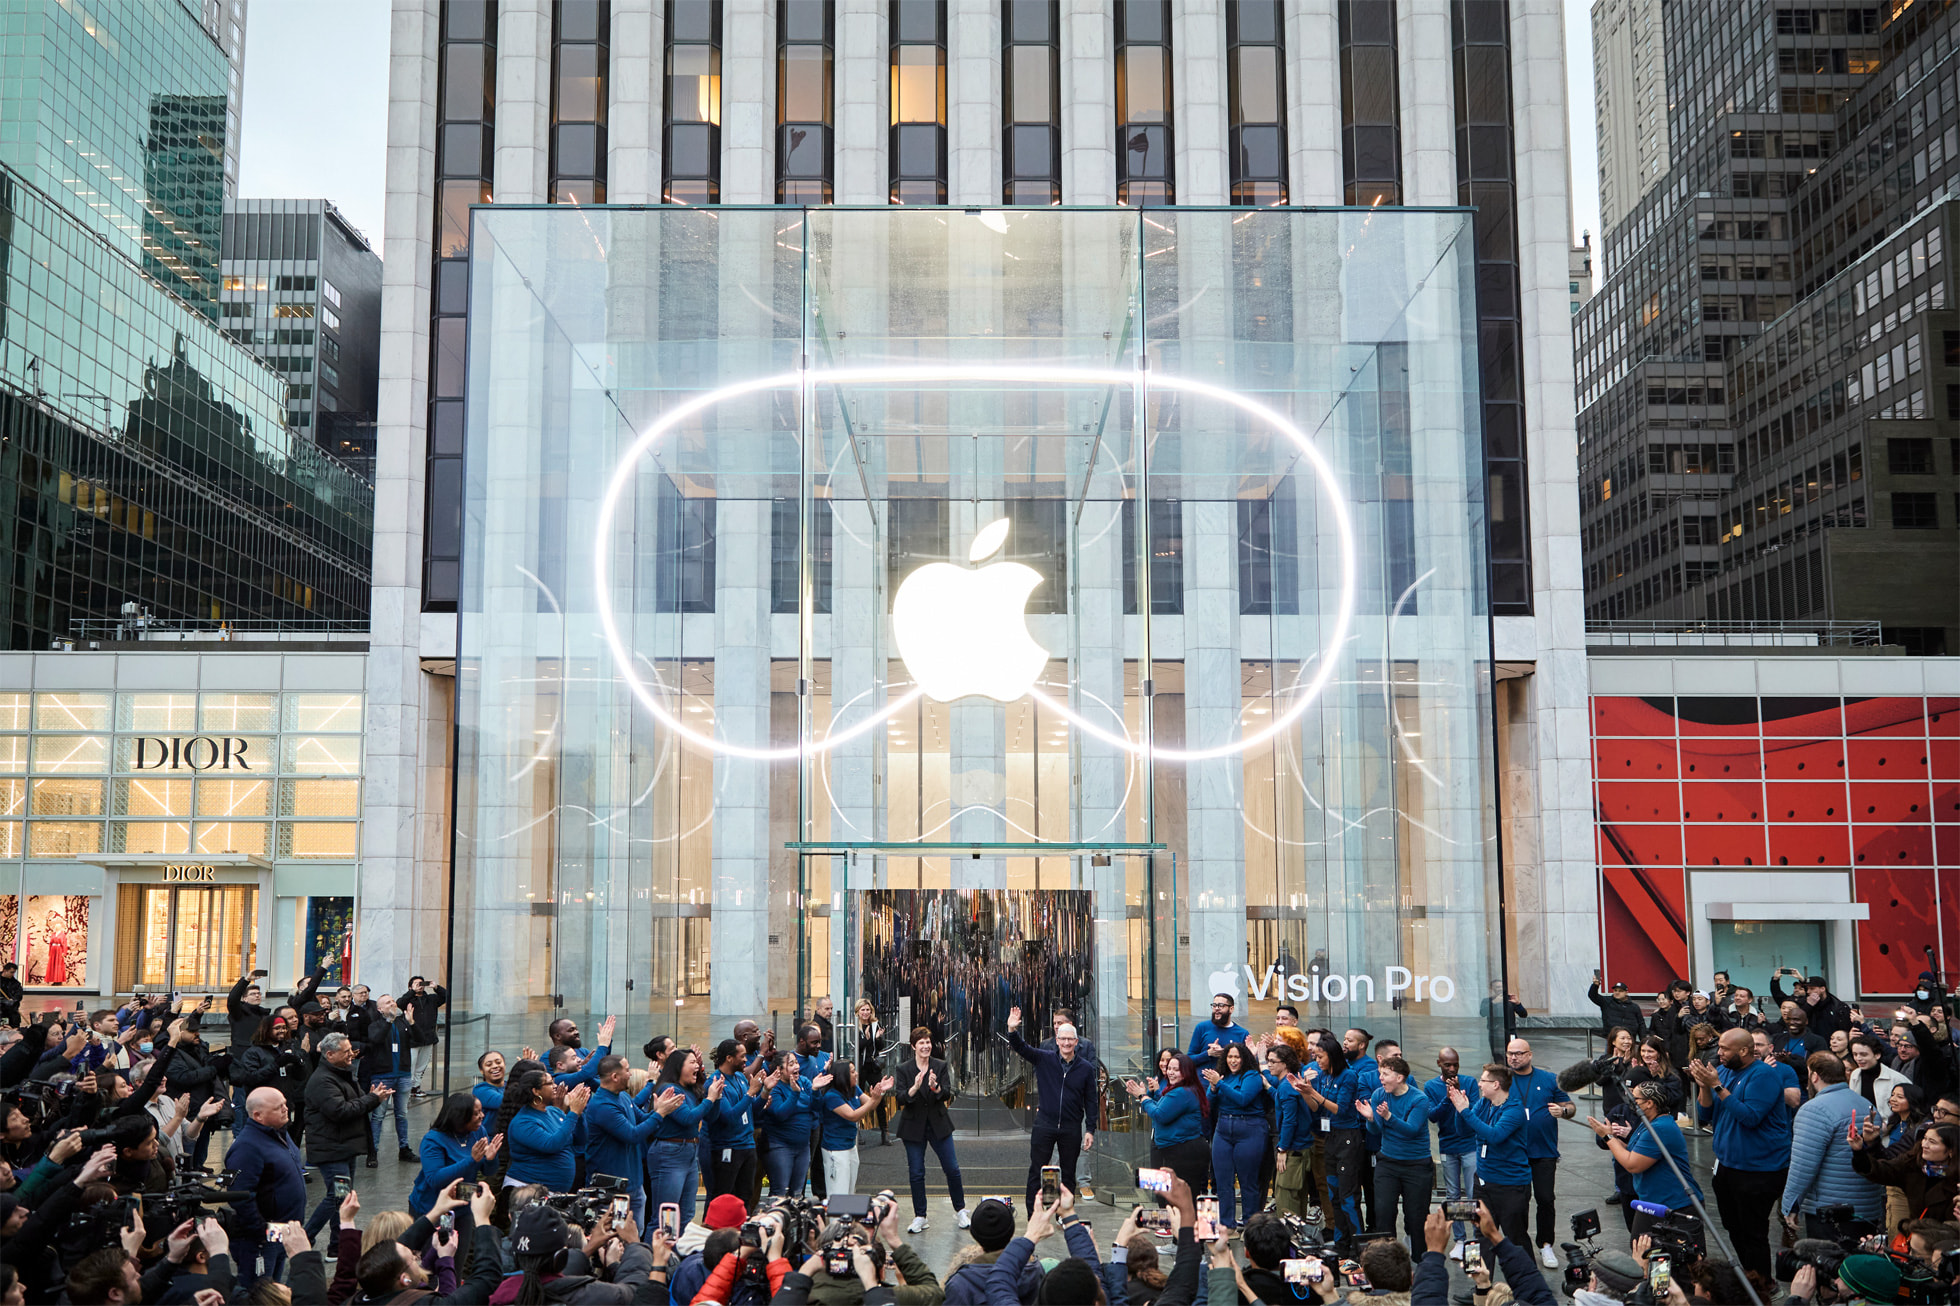 Apple's AVP release event in NYC